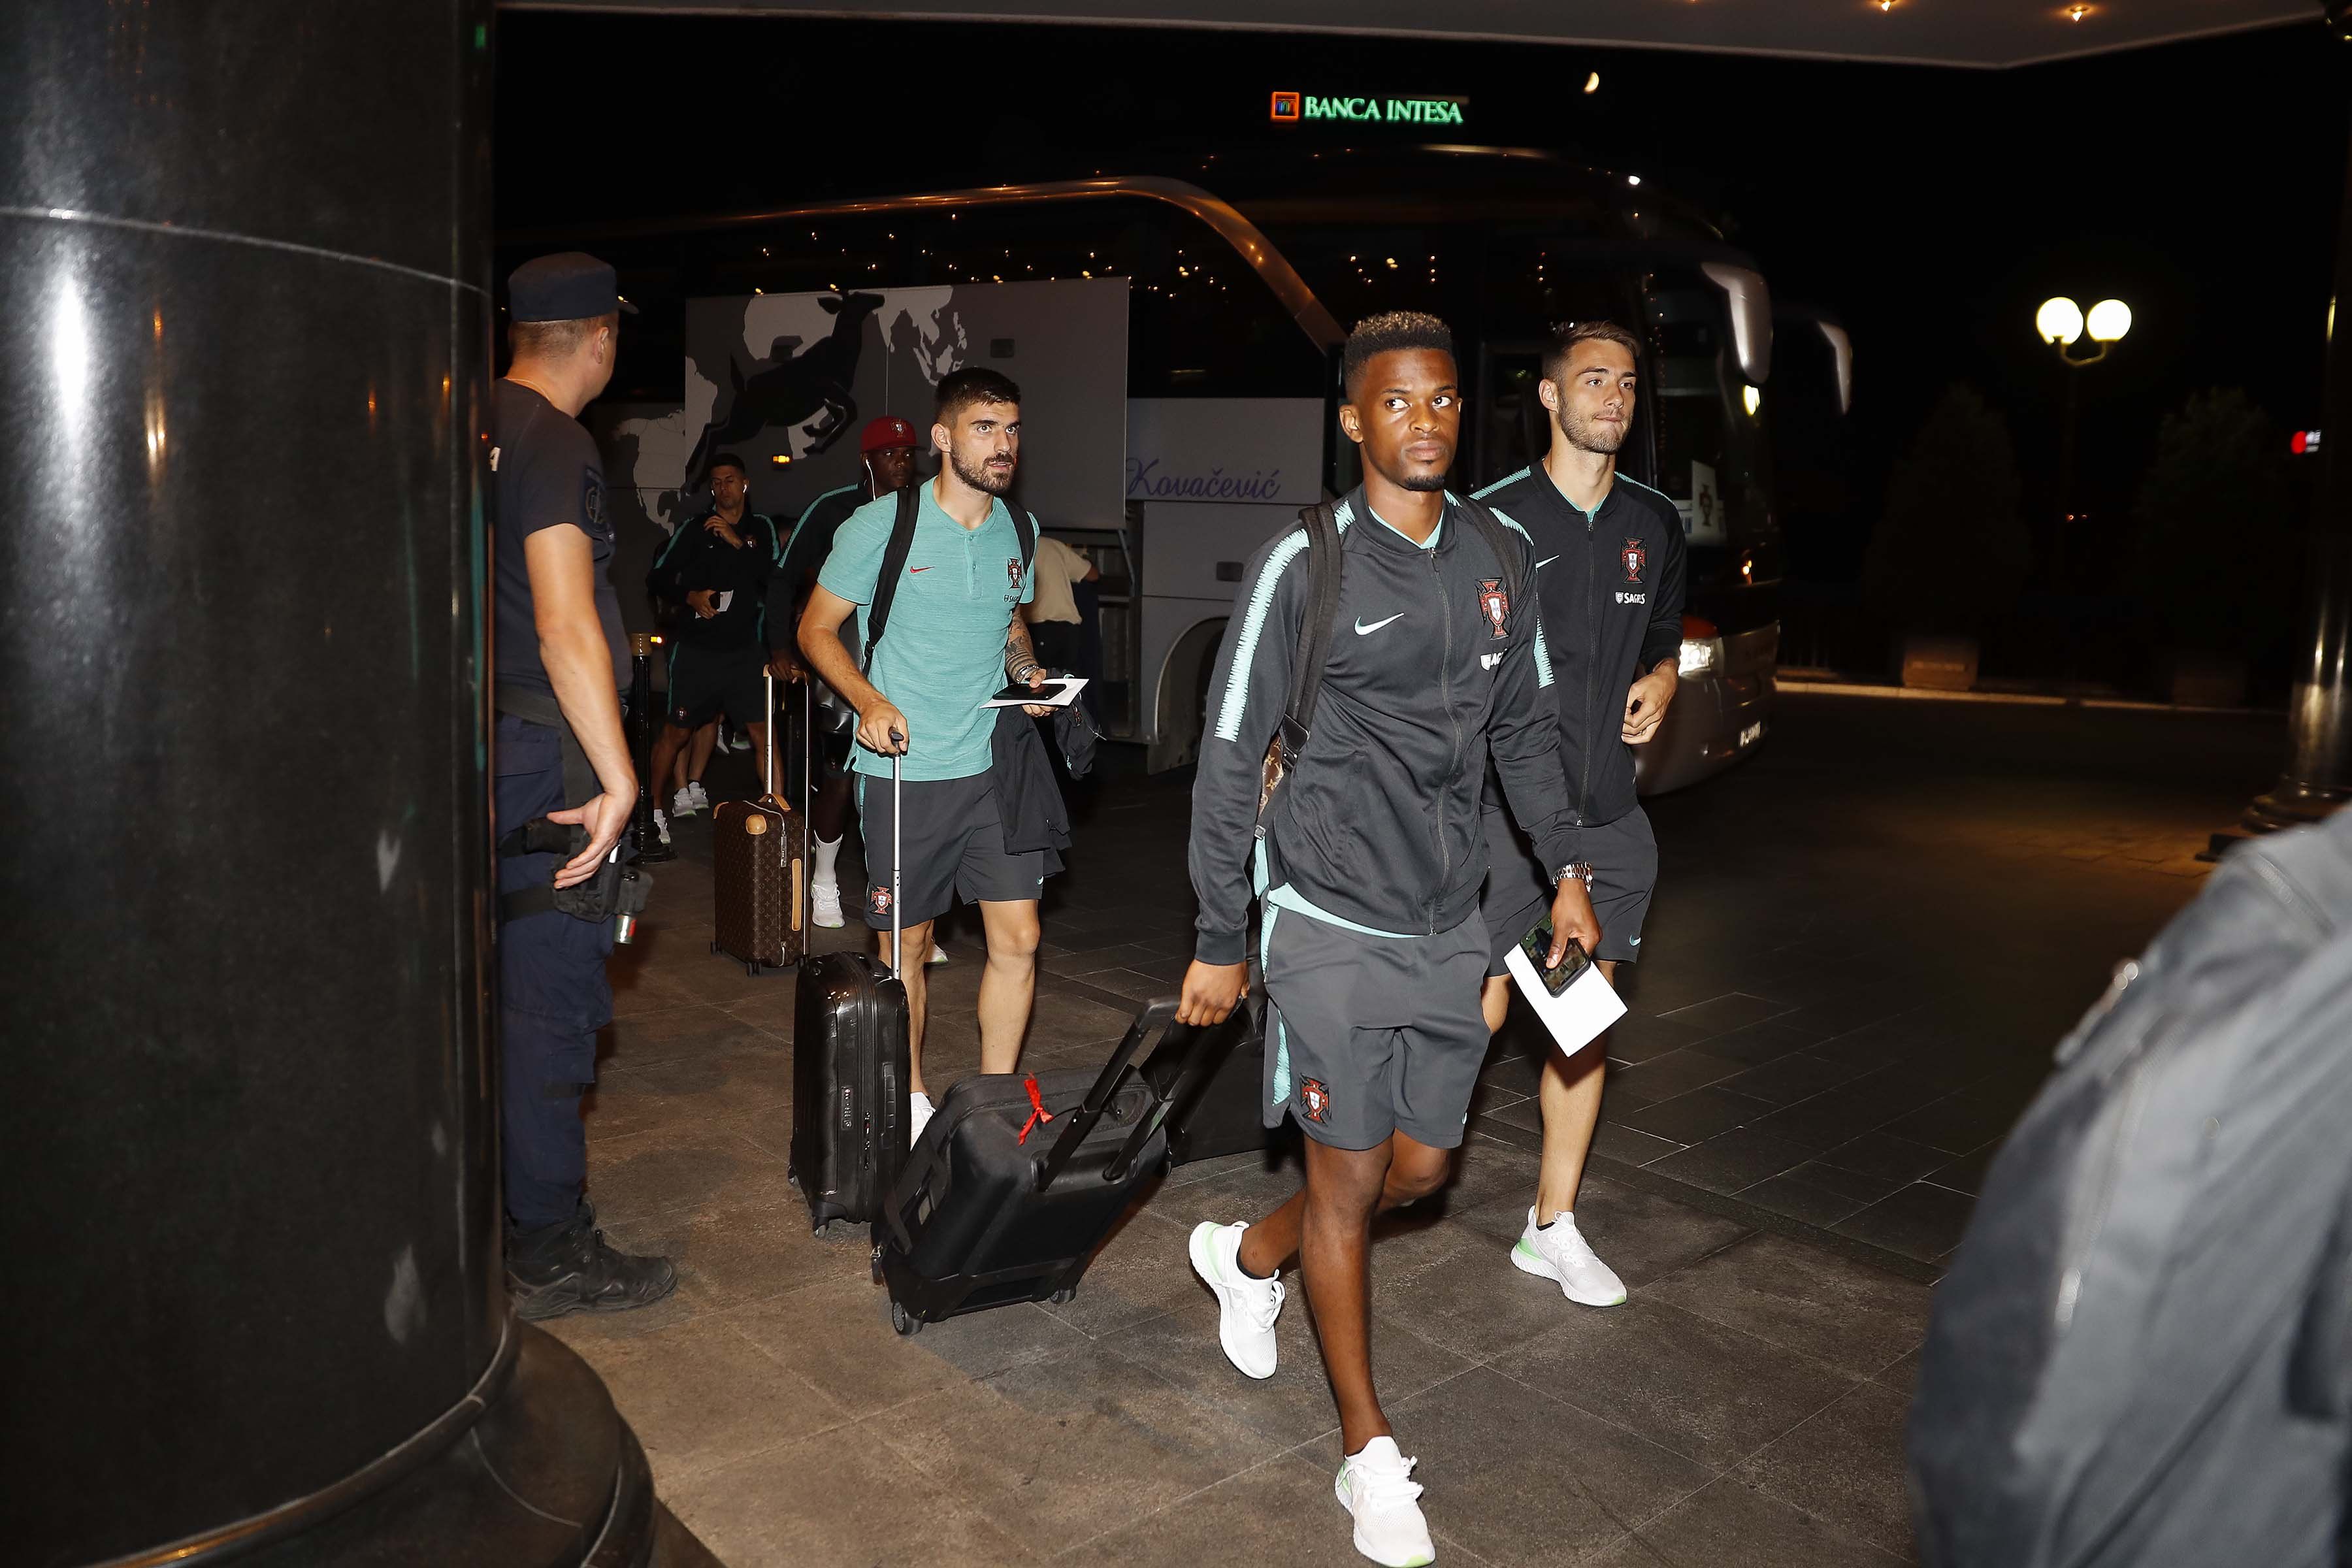 Semedo Leaves  of a stadium with Portugal